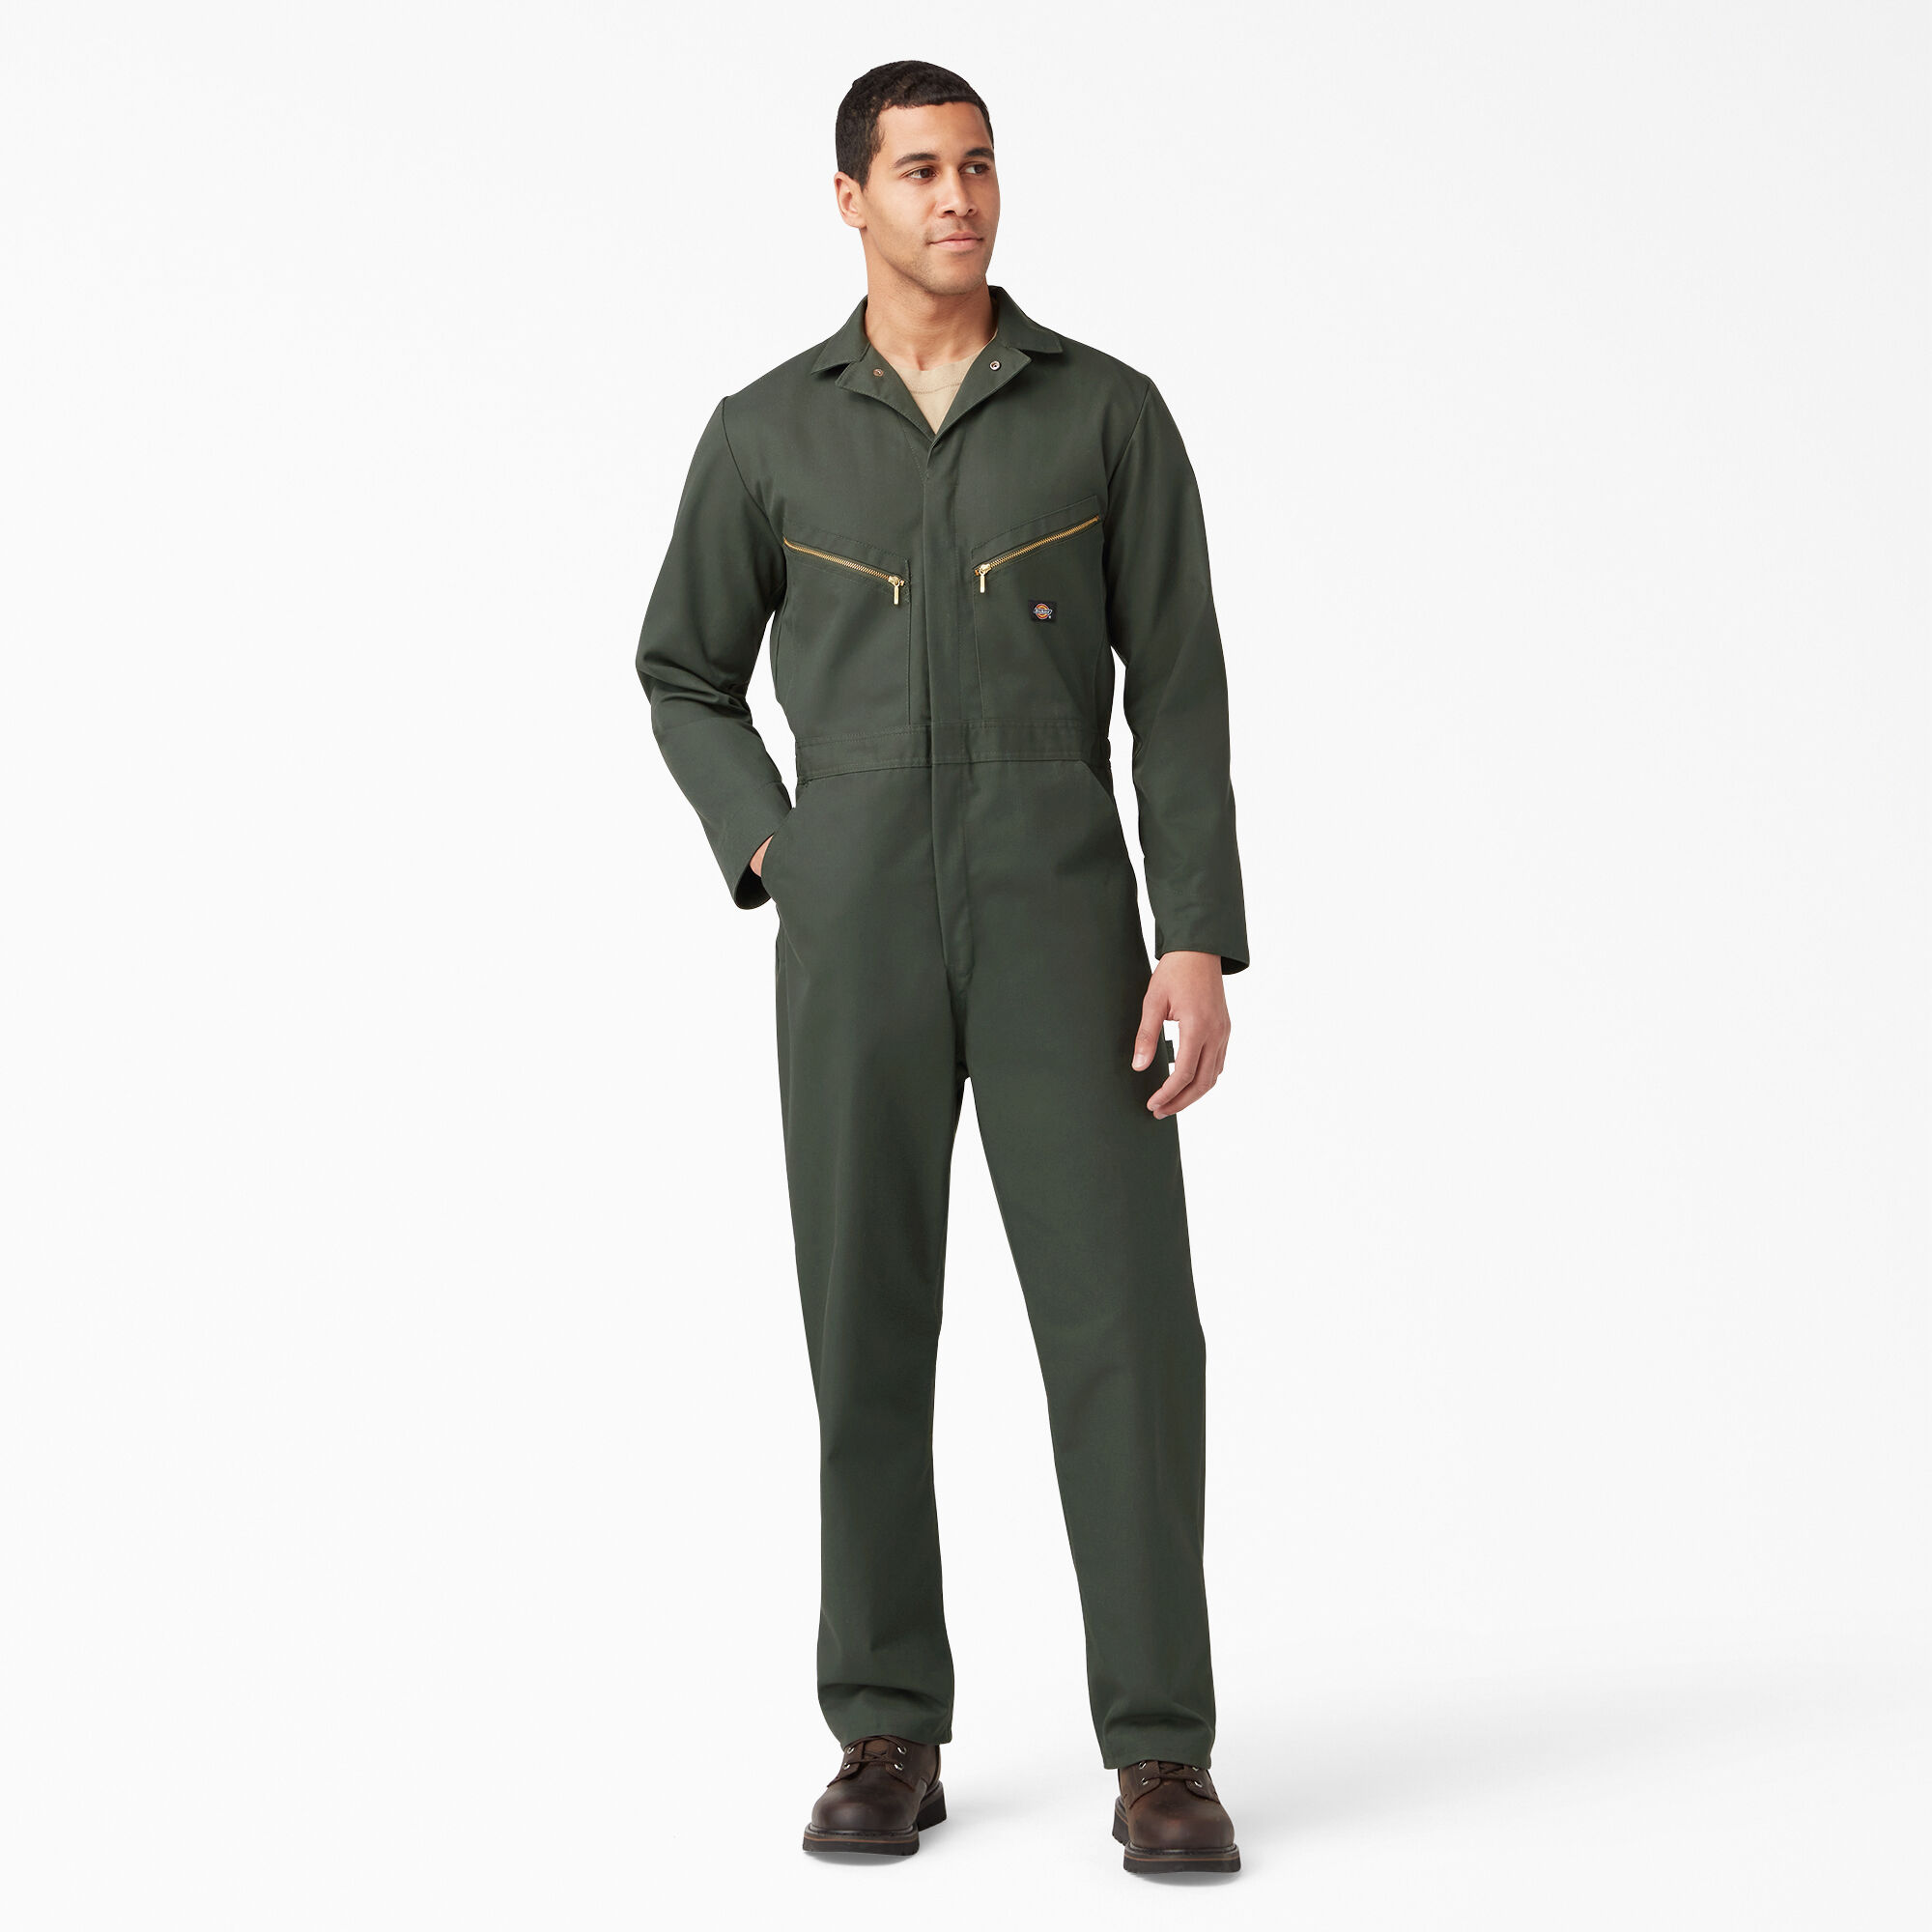 Deluxe Blended Long Sleeve Coveralls, Olive Green